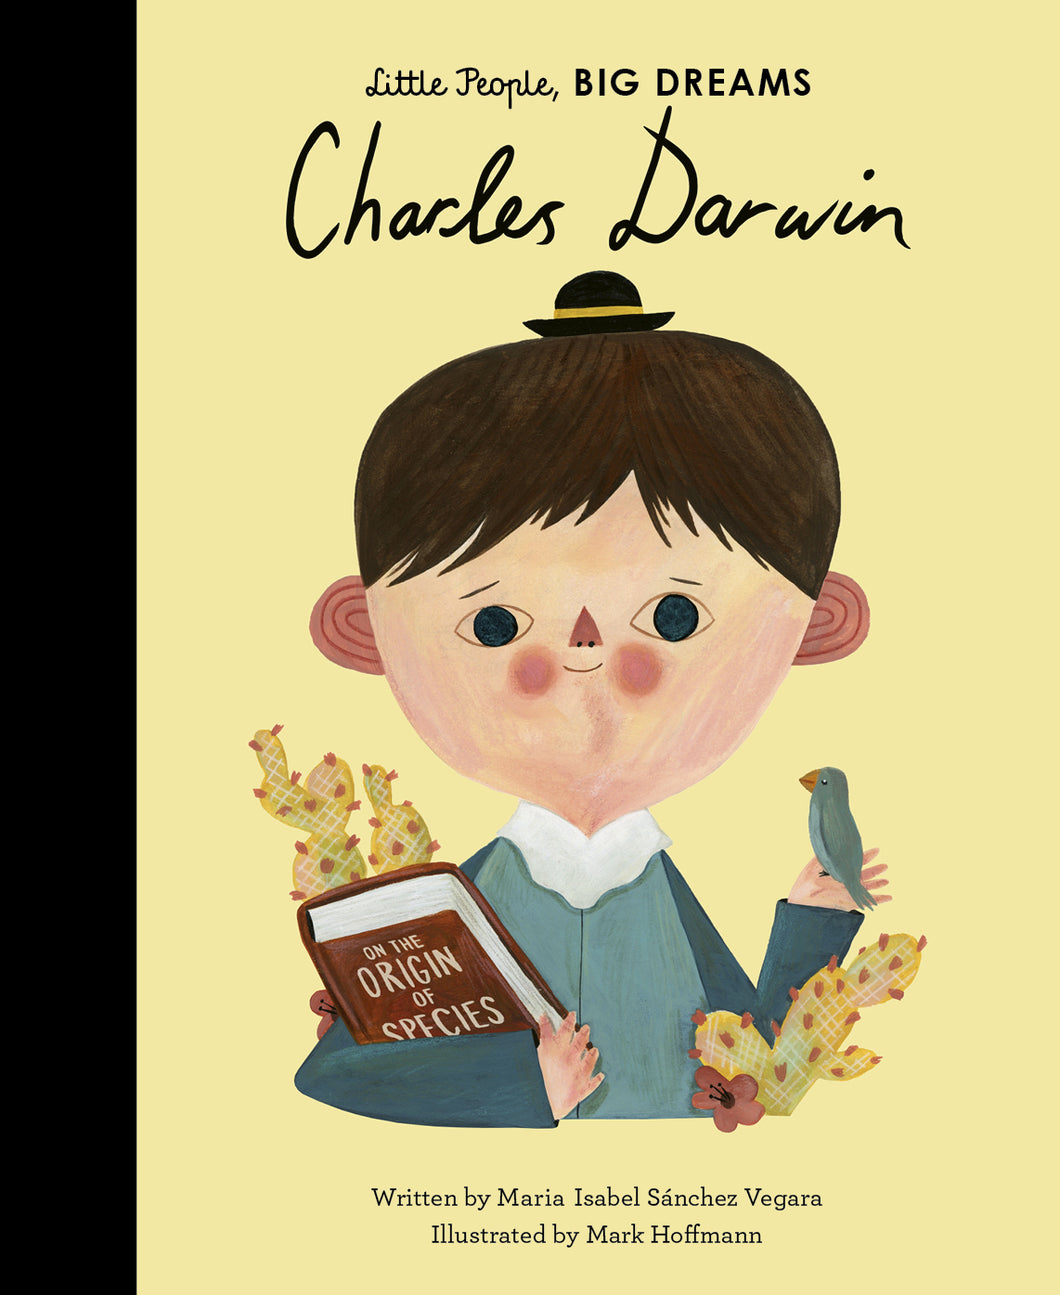 Book cover shows Charles Darwin (a white boy) with 'On The Origin of Species' in one arm while a blue bird sits on his palm. A tiny black hat sits on his head and there are cacti around him.